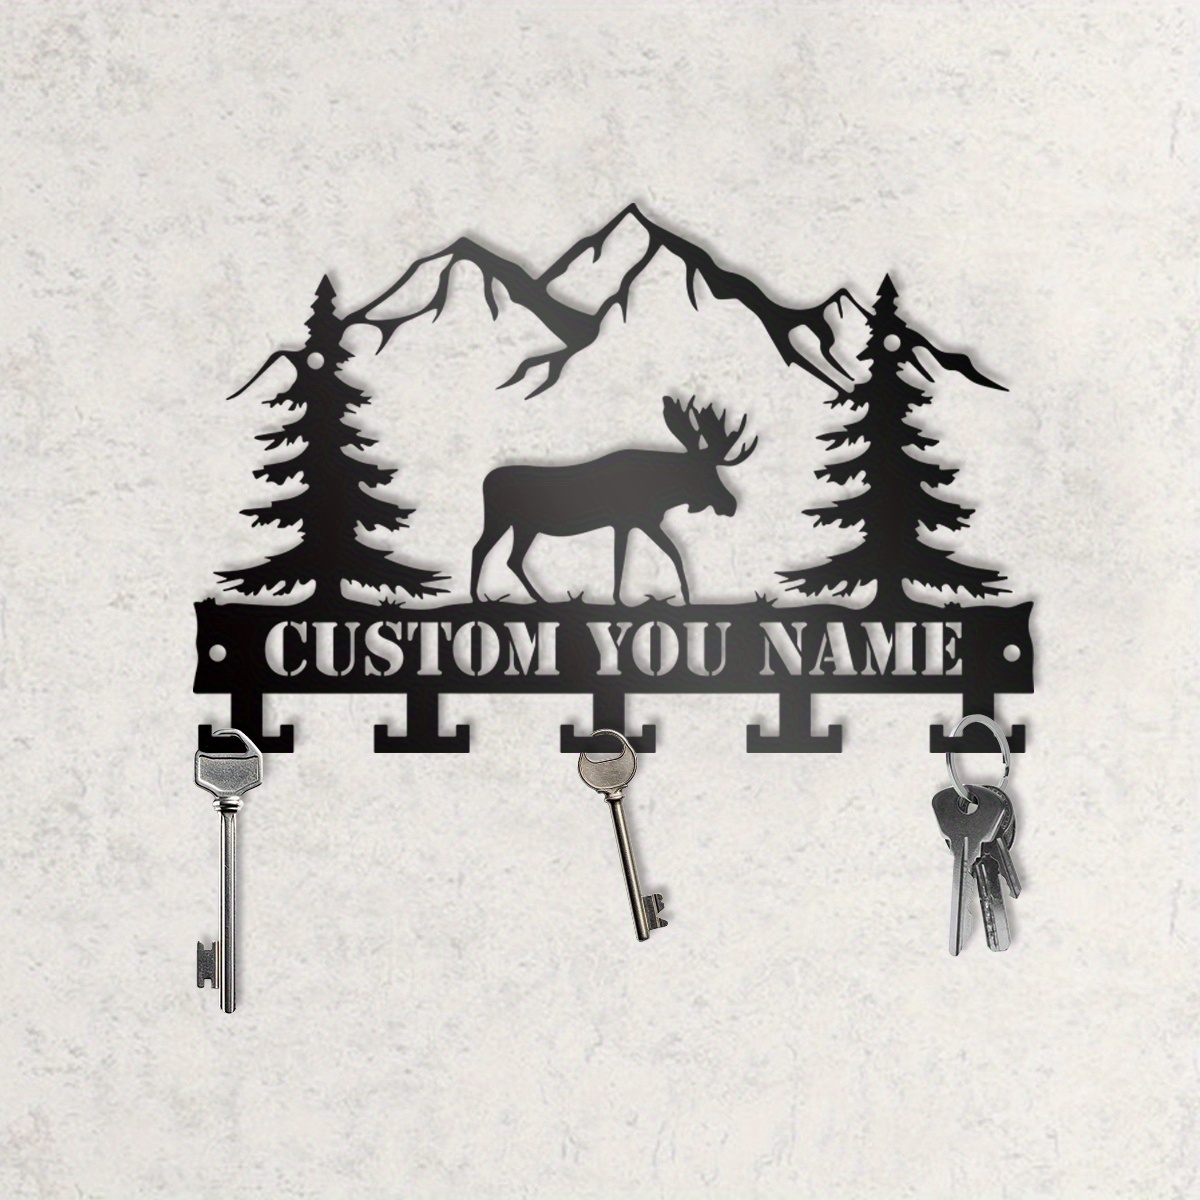 

Custom Moose Hunting Key Holder - Personalized Metal Wall Art With Name Sign, Forest Homestead Hunter Decor, Cabin Key Rack Gift